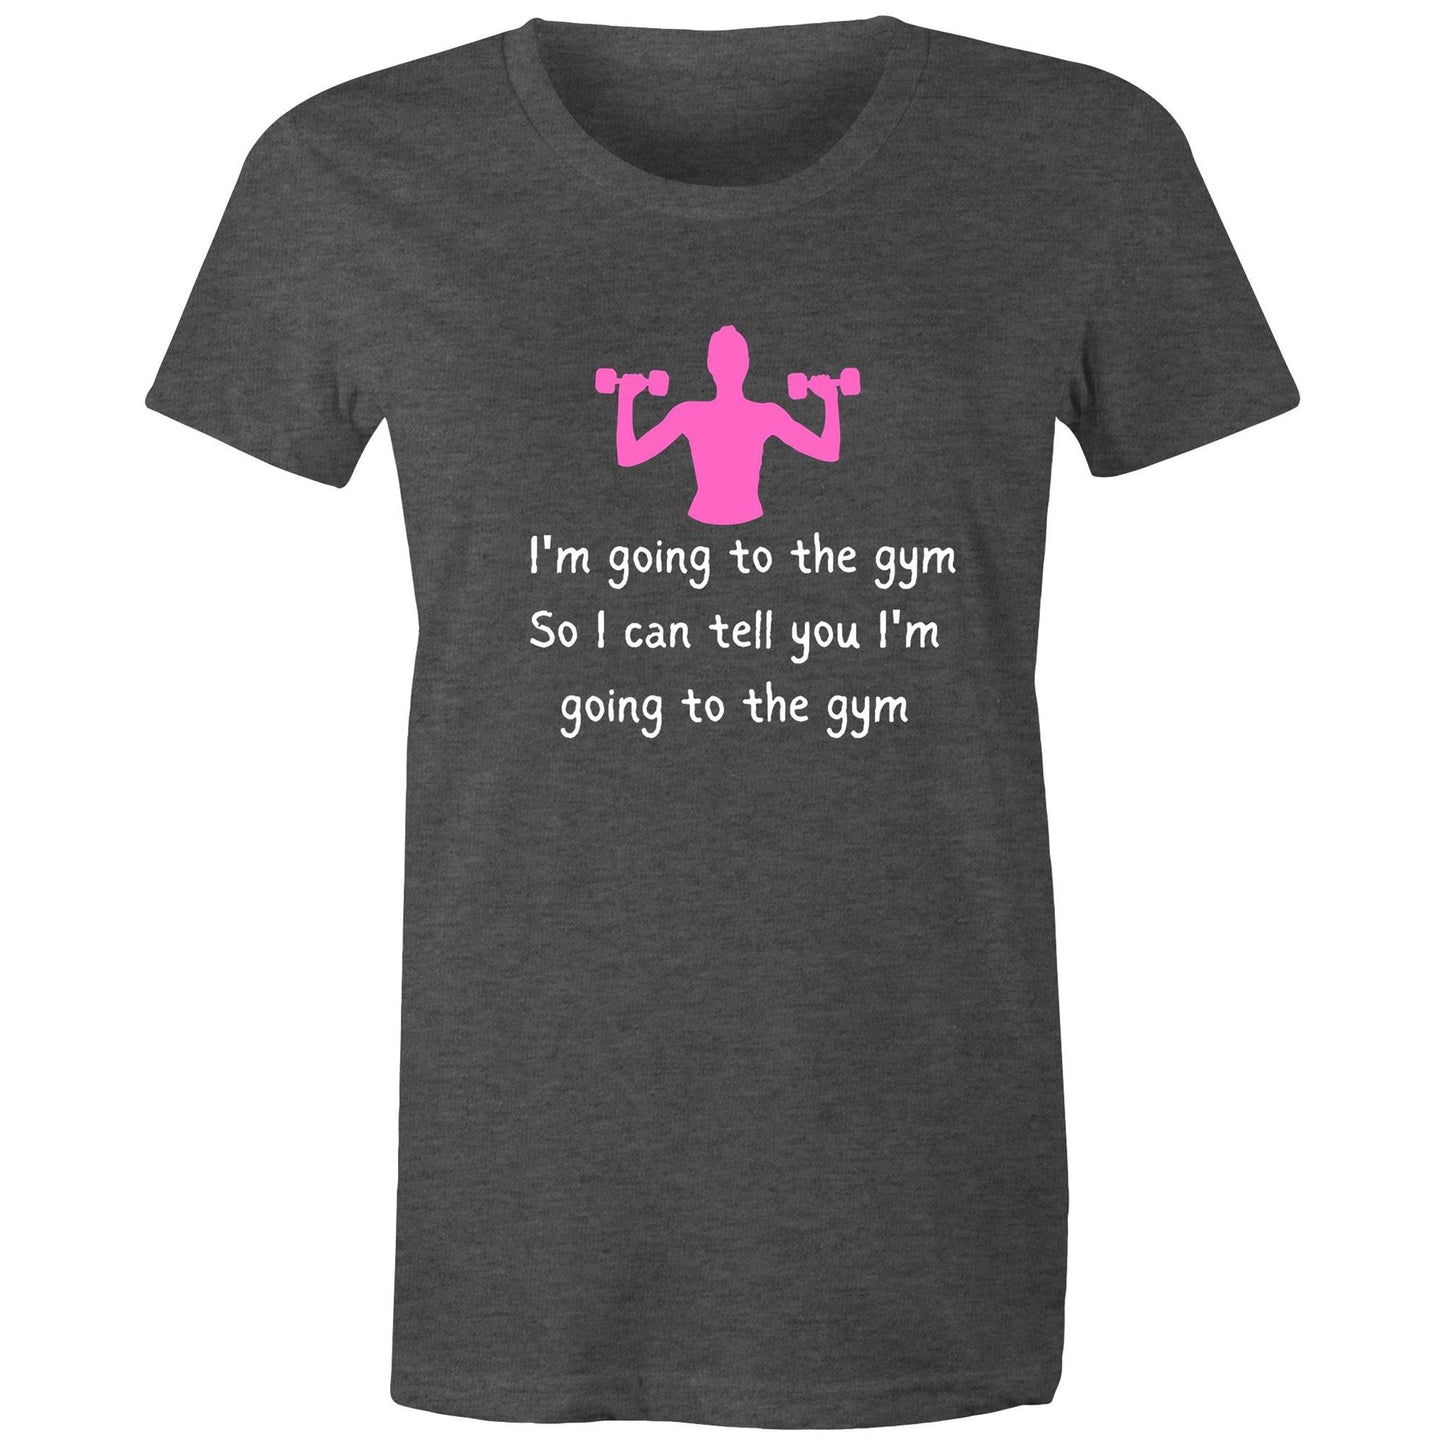 GOING TO THE GYM Women's Maple Tee